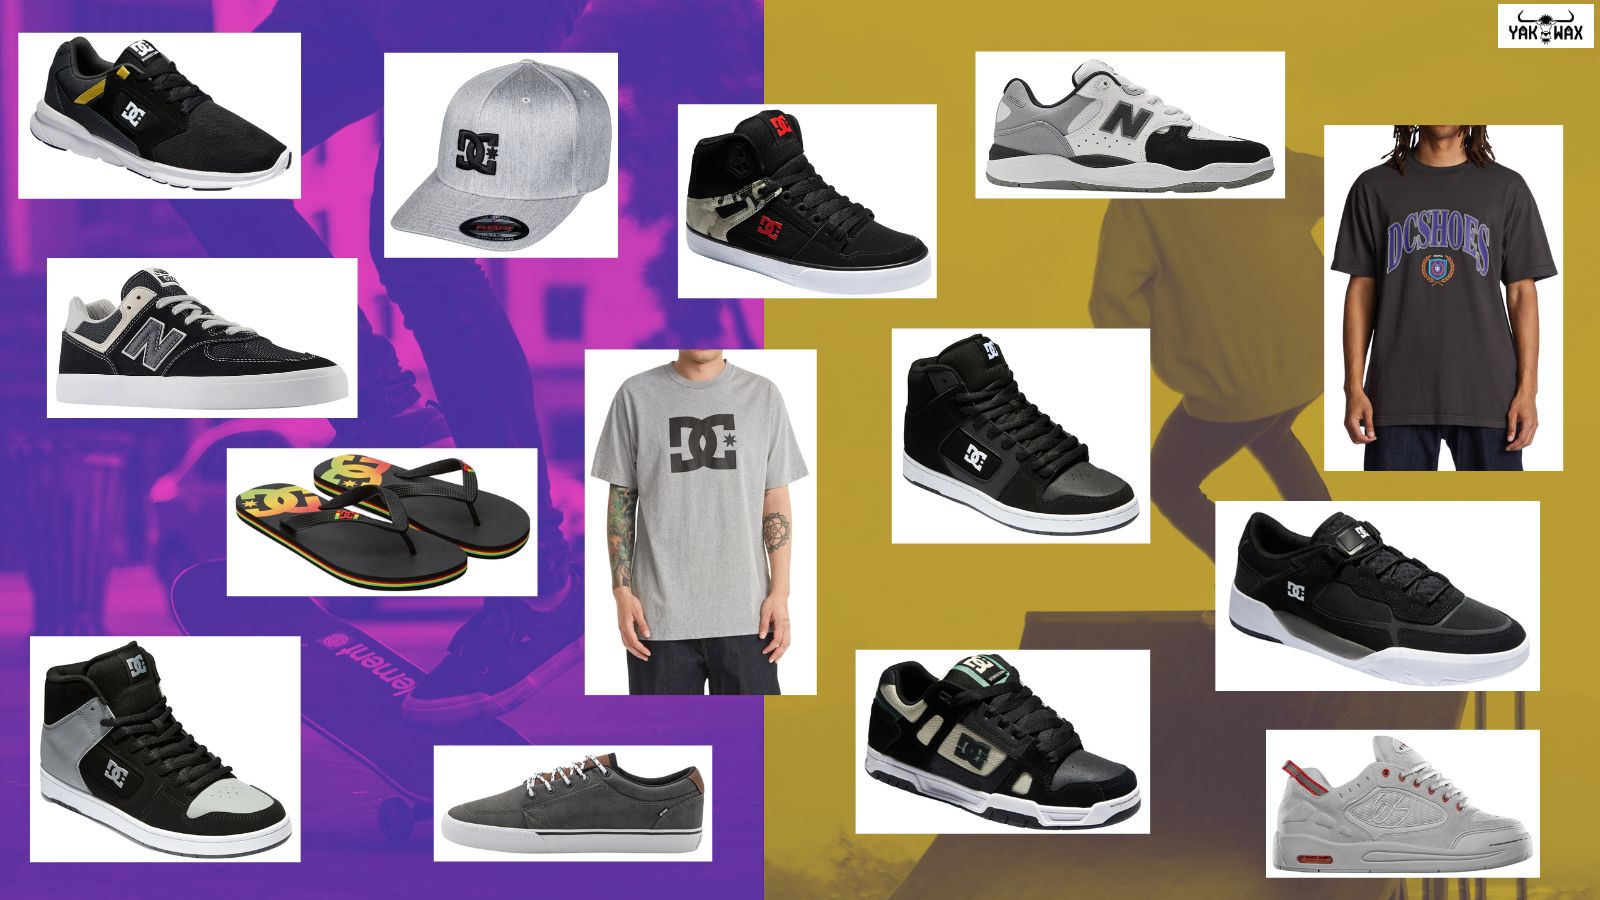 Skate-Brand-Shoes-Apparel-Accessories-SP23